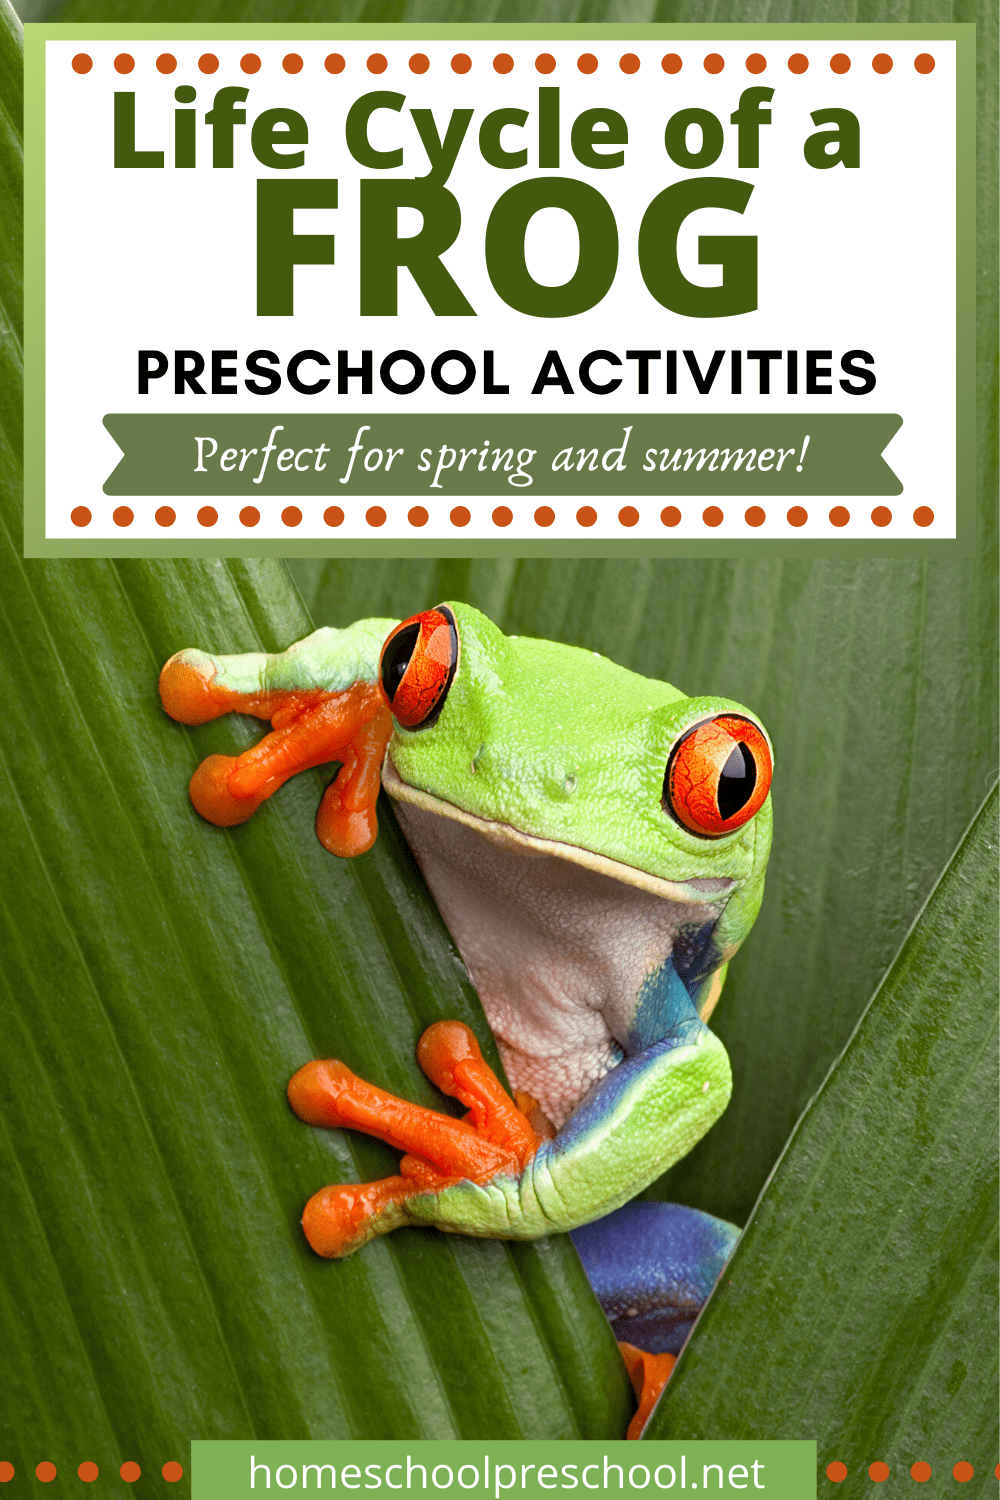 frog-life-cycle-acts-1 Nonfiction Frog Books